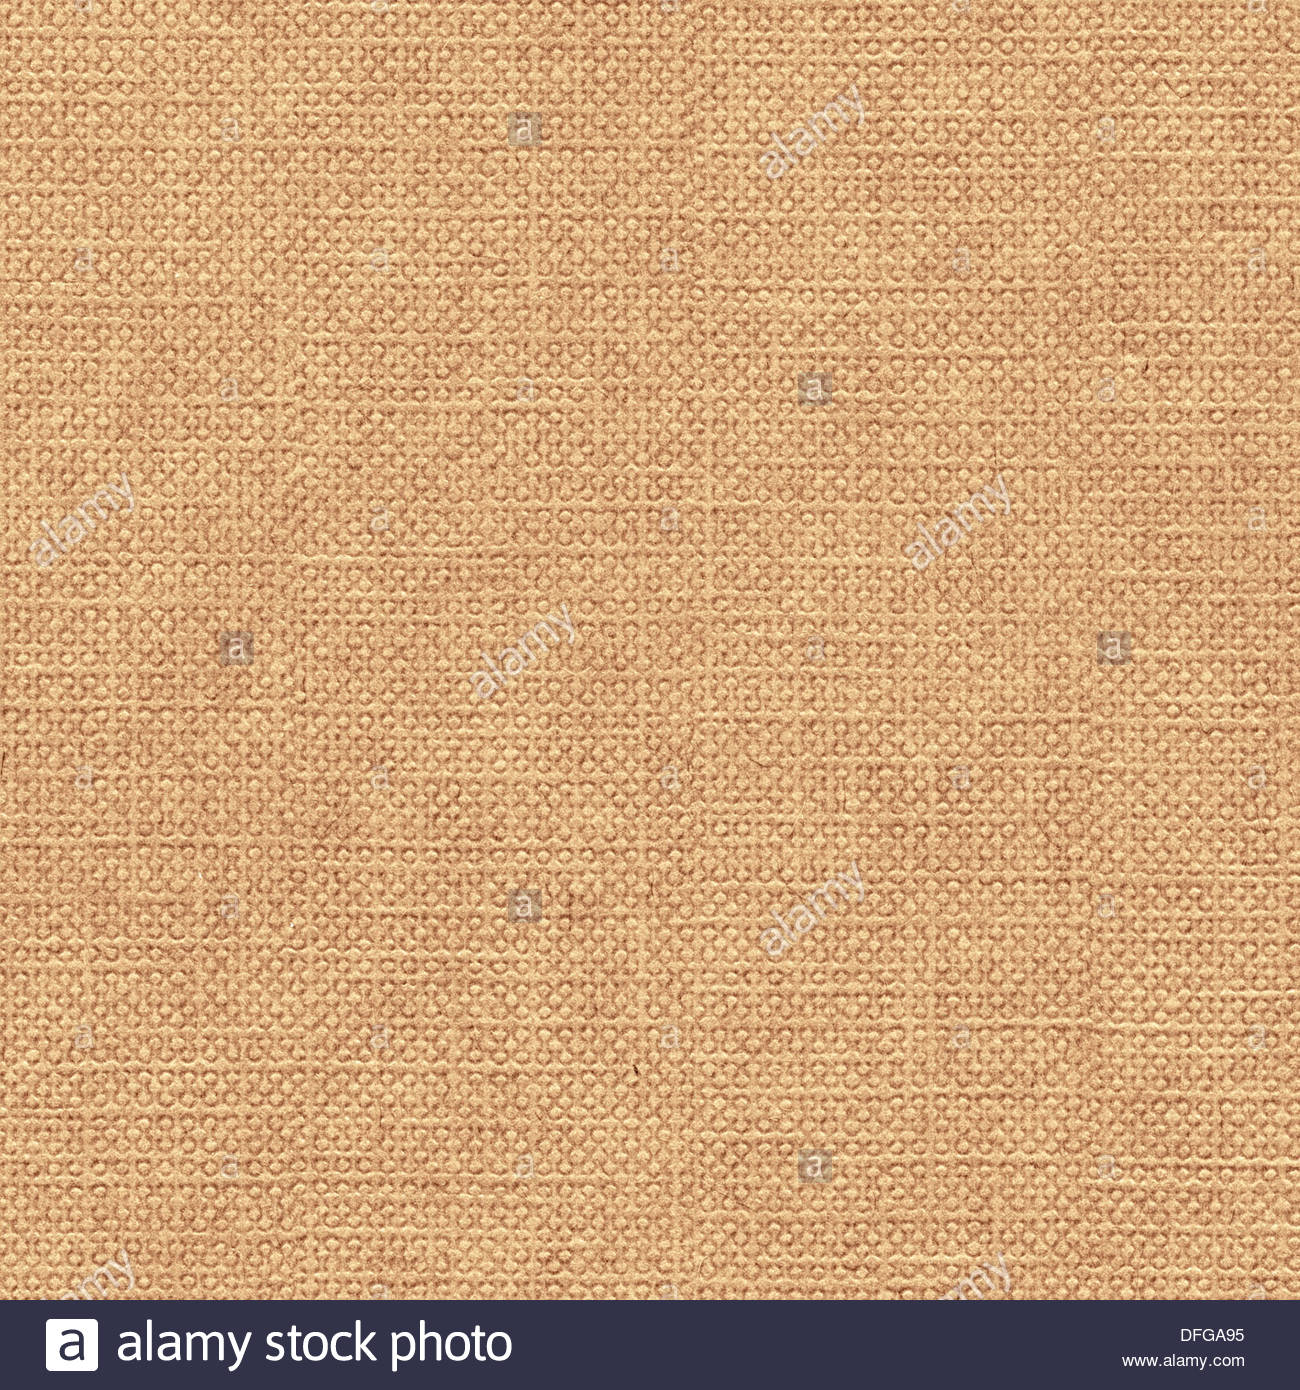 Free Download Cardboard Texture Book Cover Background Stock Photo 61210273 Alamy 1300x1390 For Your Desktop Mobile Tablet Explore 45 Cover Background Cover Wallpaper Cover Background Cover Photo Wallpaper